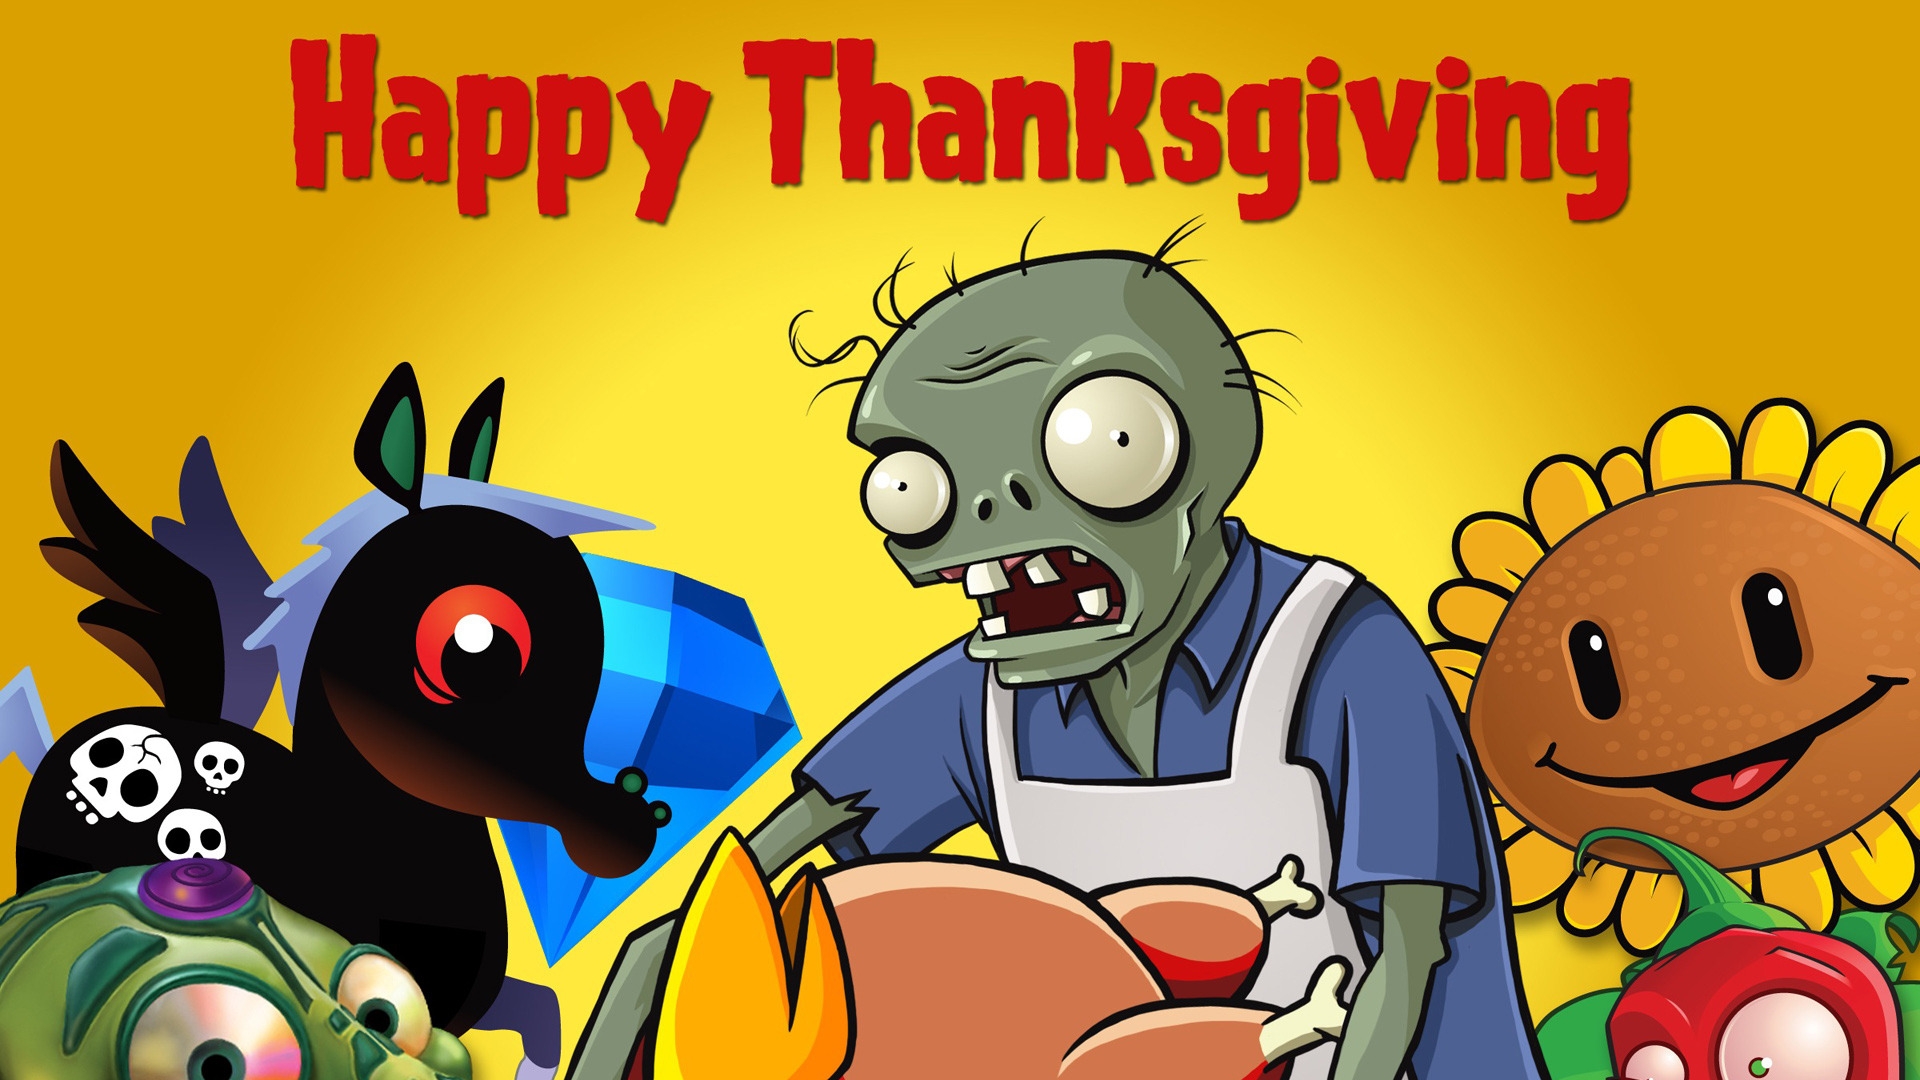 Happy Thanksgiving for 1920 x 1080 HDTV 1080p resolution